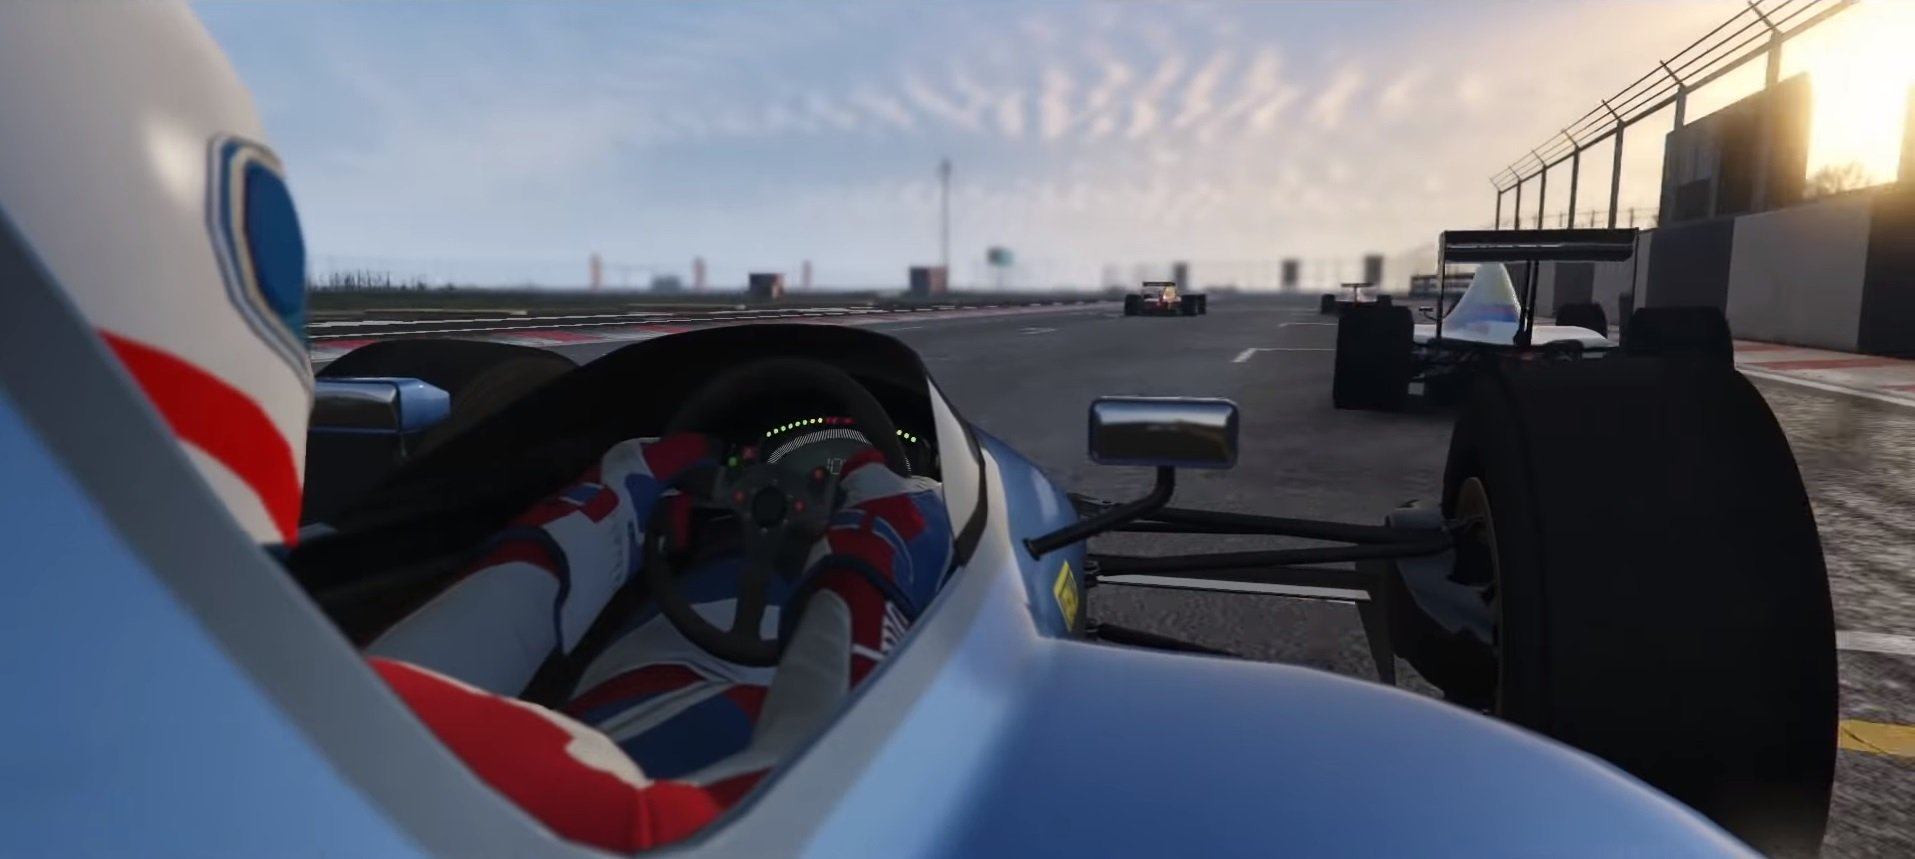 GTA Online has F1 racing now, and thats kinda weird